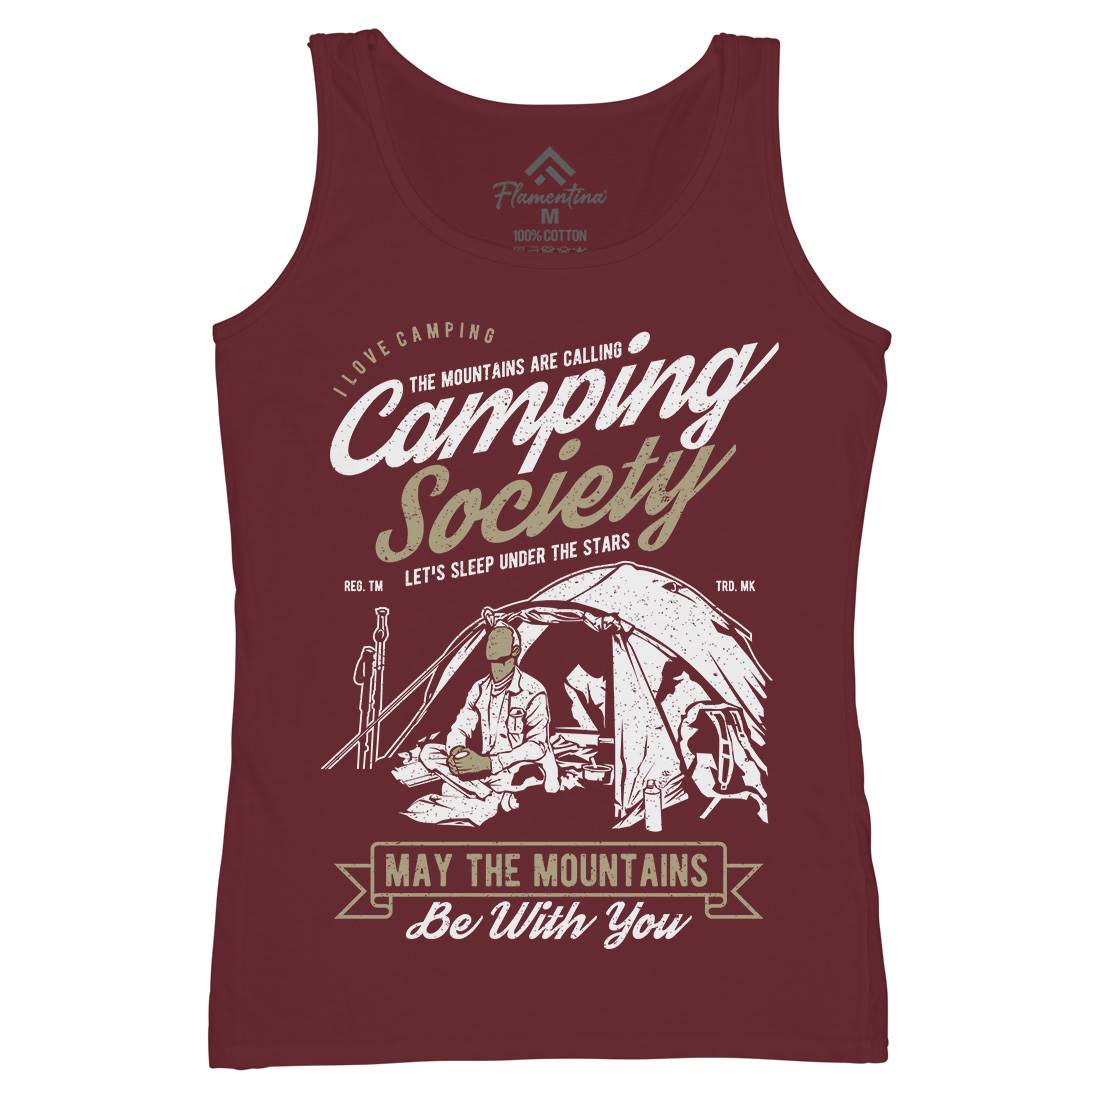 Camping Society Womens Organic Tank Top Vest Nature A631